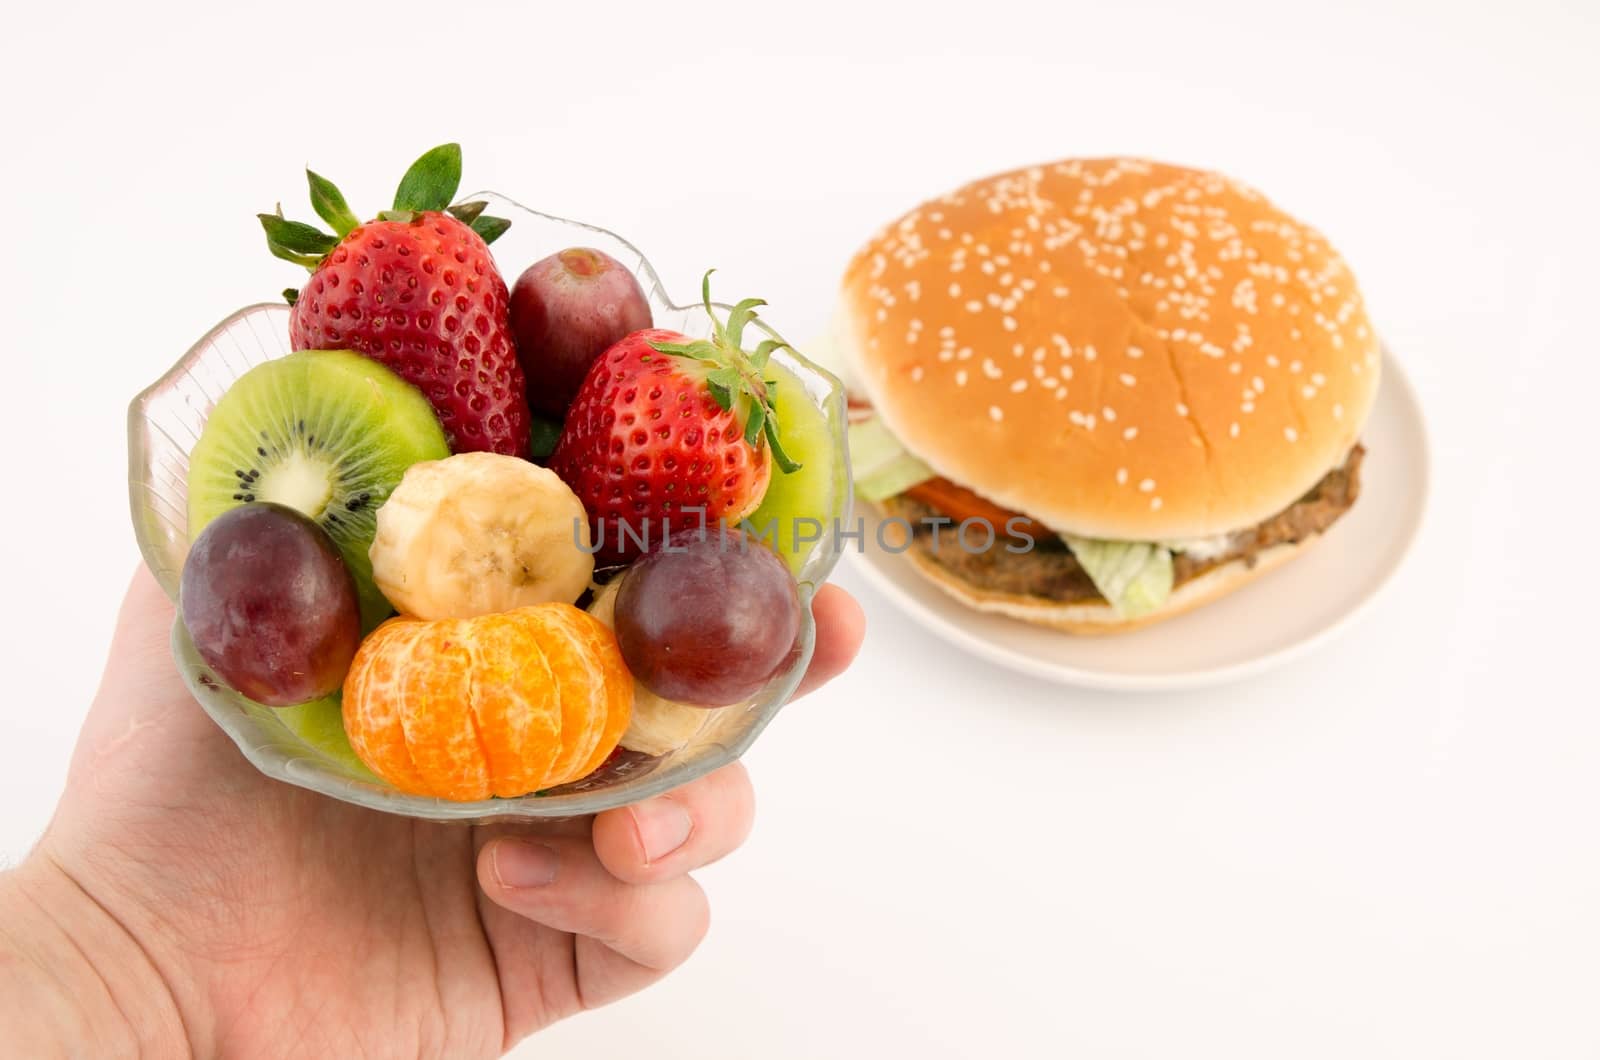 Choosing between hamburger and fruits. Food on white background